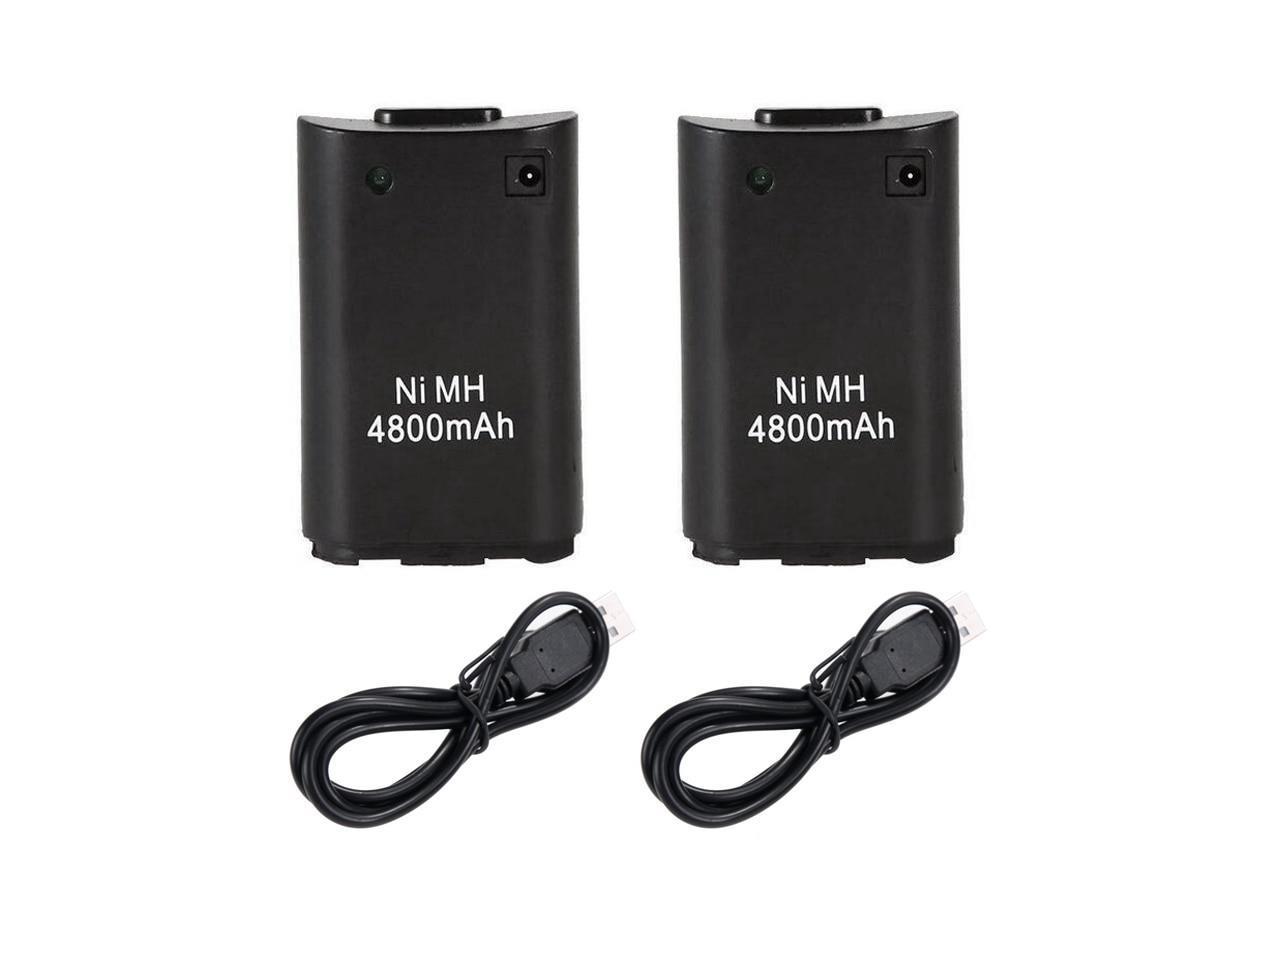 2x 4800mAh Rechargeable Battery Pack + USB Charger Cable for Xbox 360 Wireless Game Controller Gamepads For Xbox 360 Battery